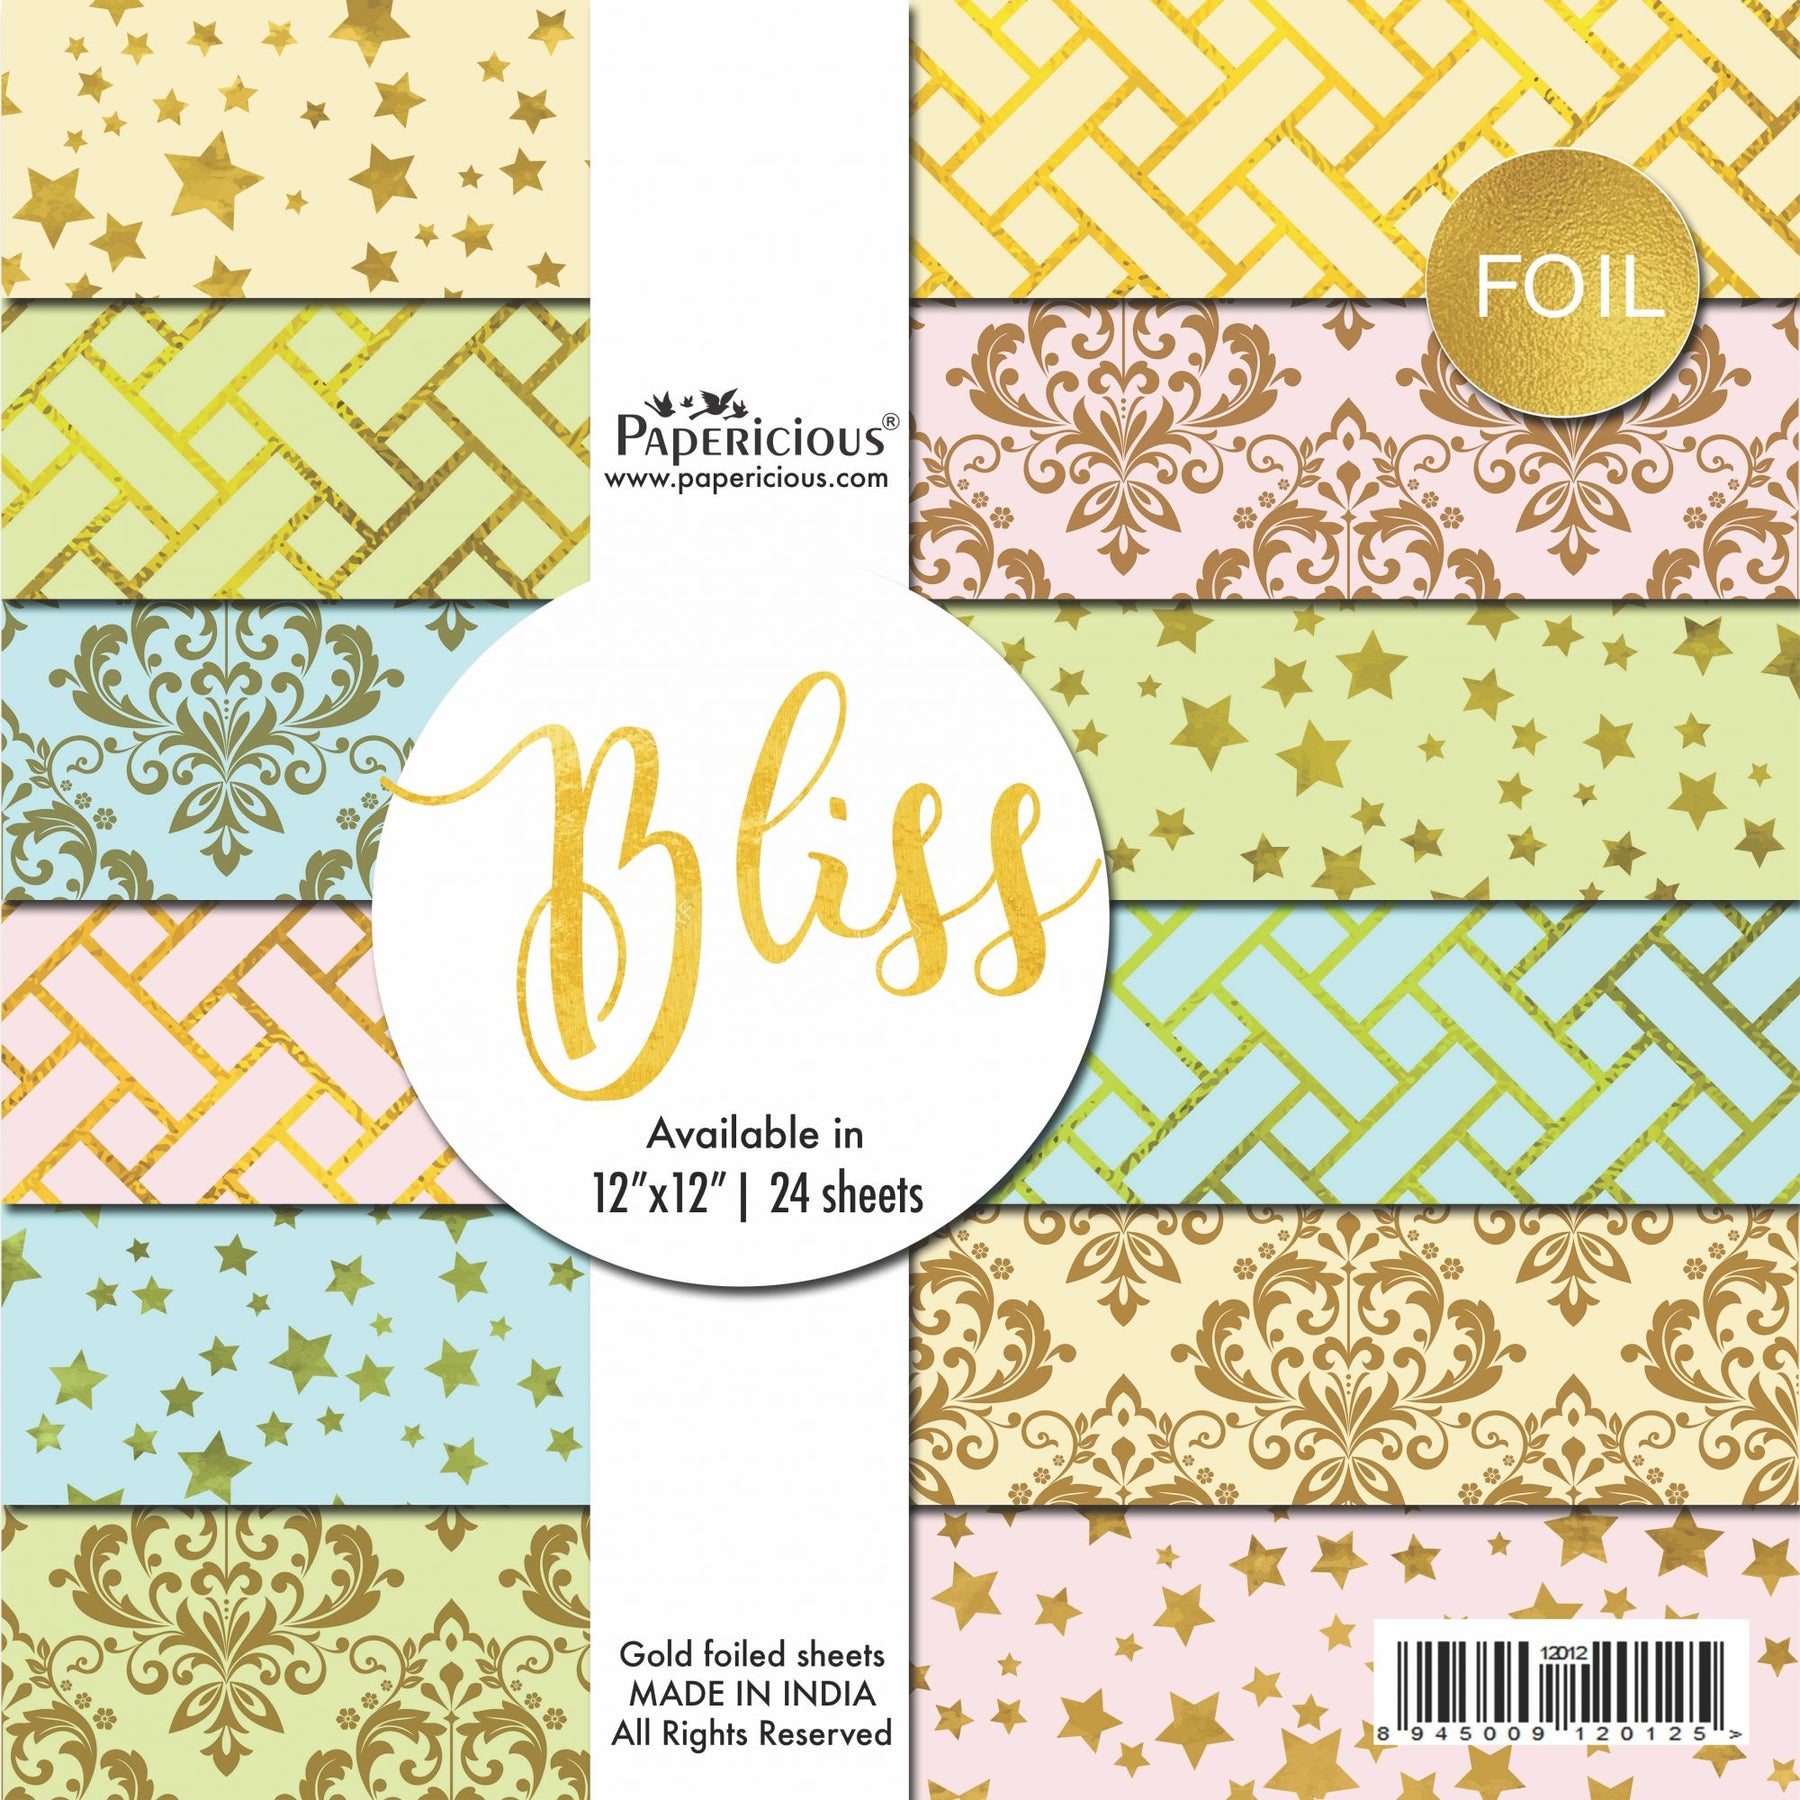 PAPERICIOUS - Bliss - Golden Foiled Designer Pattern Printed Scrapbook Papers 12x12 inch  / 24 sheets